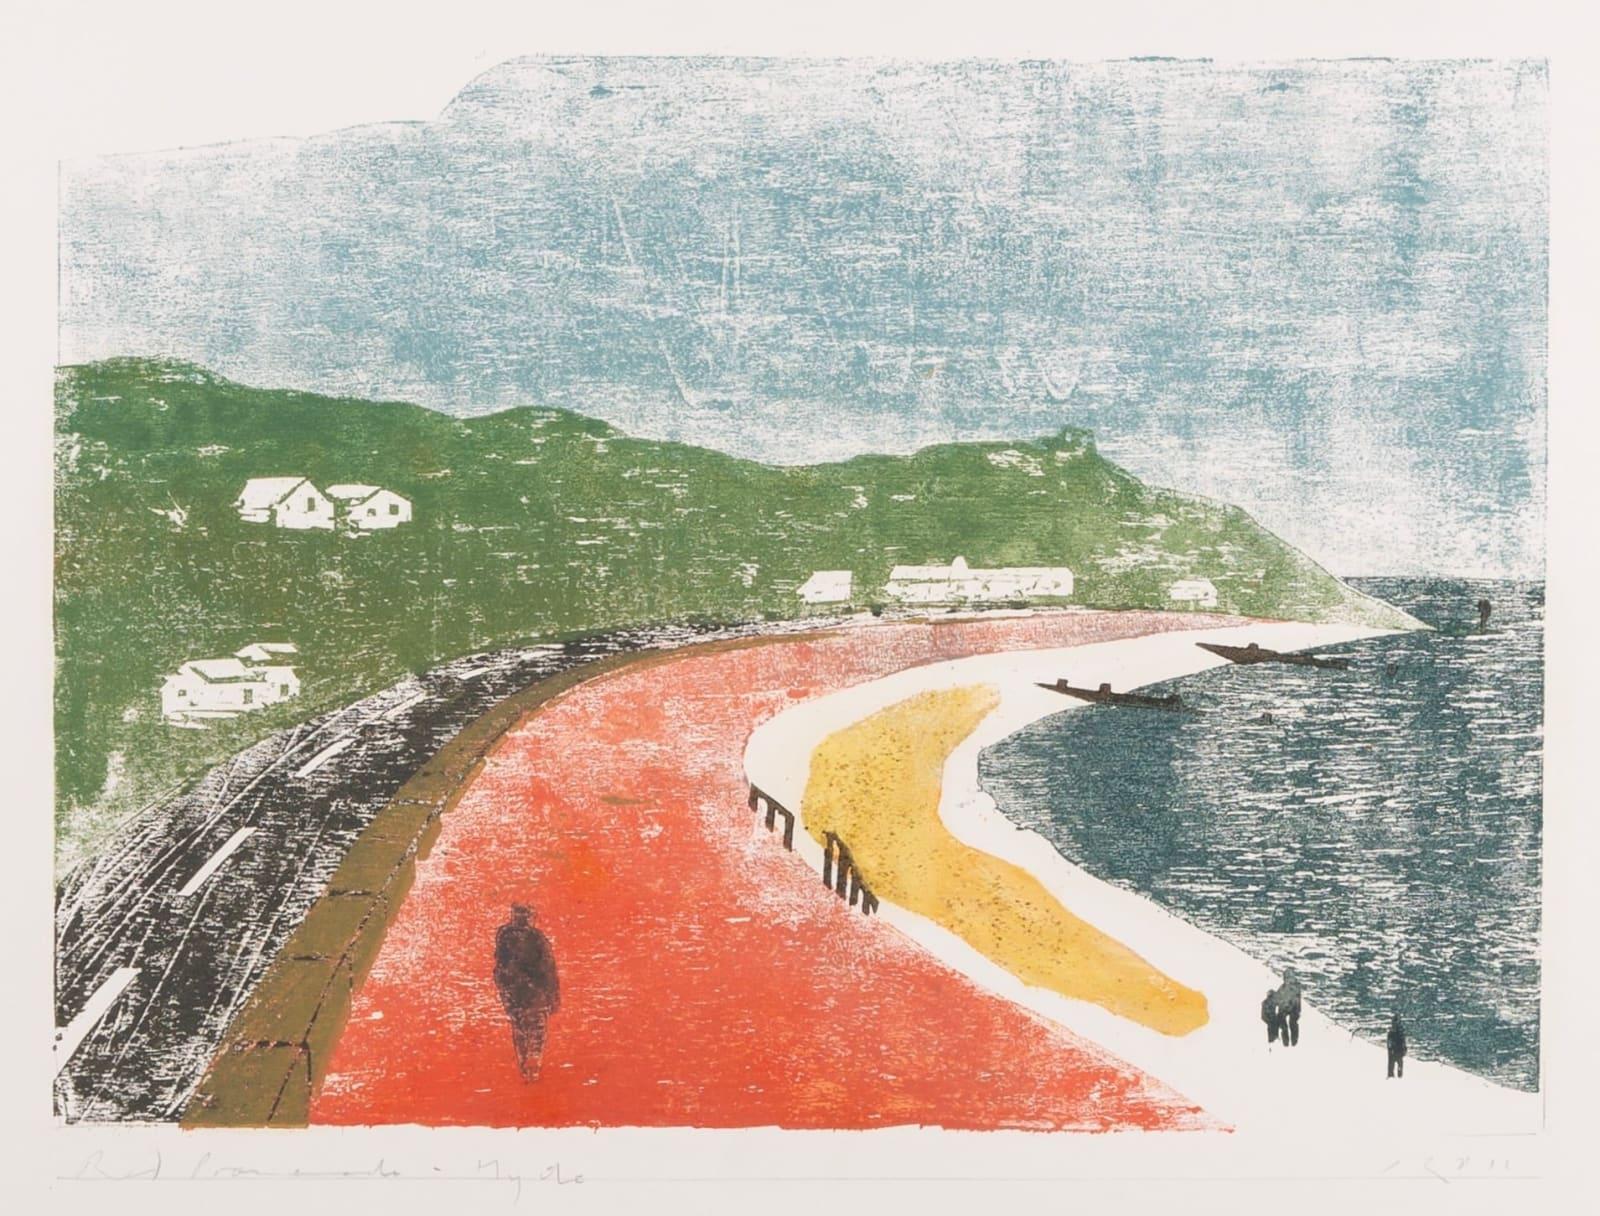 Red Promenade, Hythe Painting by Keith Purser B. 1944, 2011

Additional information:
Medium: Woodcut with hand-colouring
Dimensions: 42 x 52.5 cm
16 1/2 x 20 5/8 in
Signed, dated and titled

Keith Purser lives and works on the edge of the